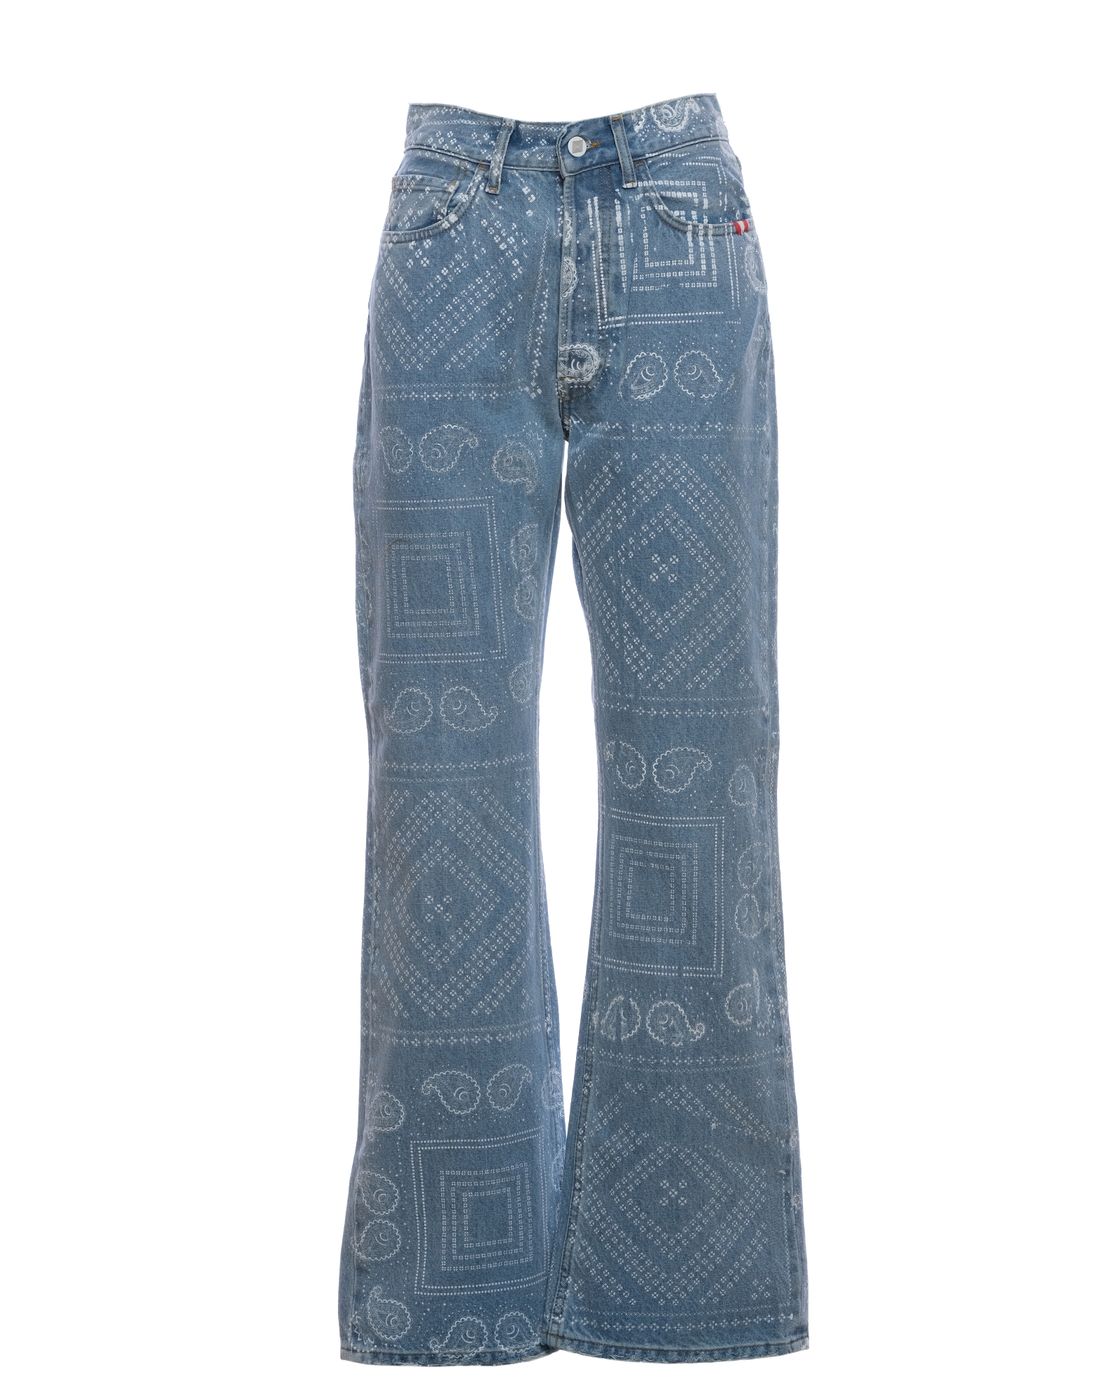 Jeans for women AMISH P22AMD007D469A018 999